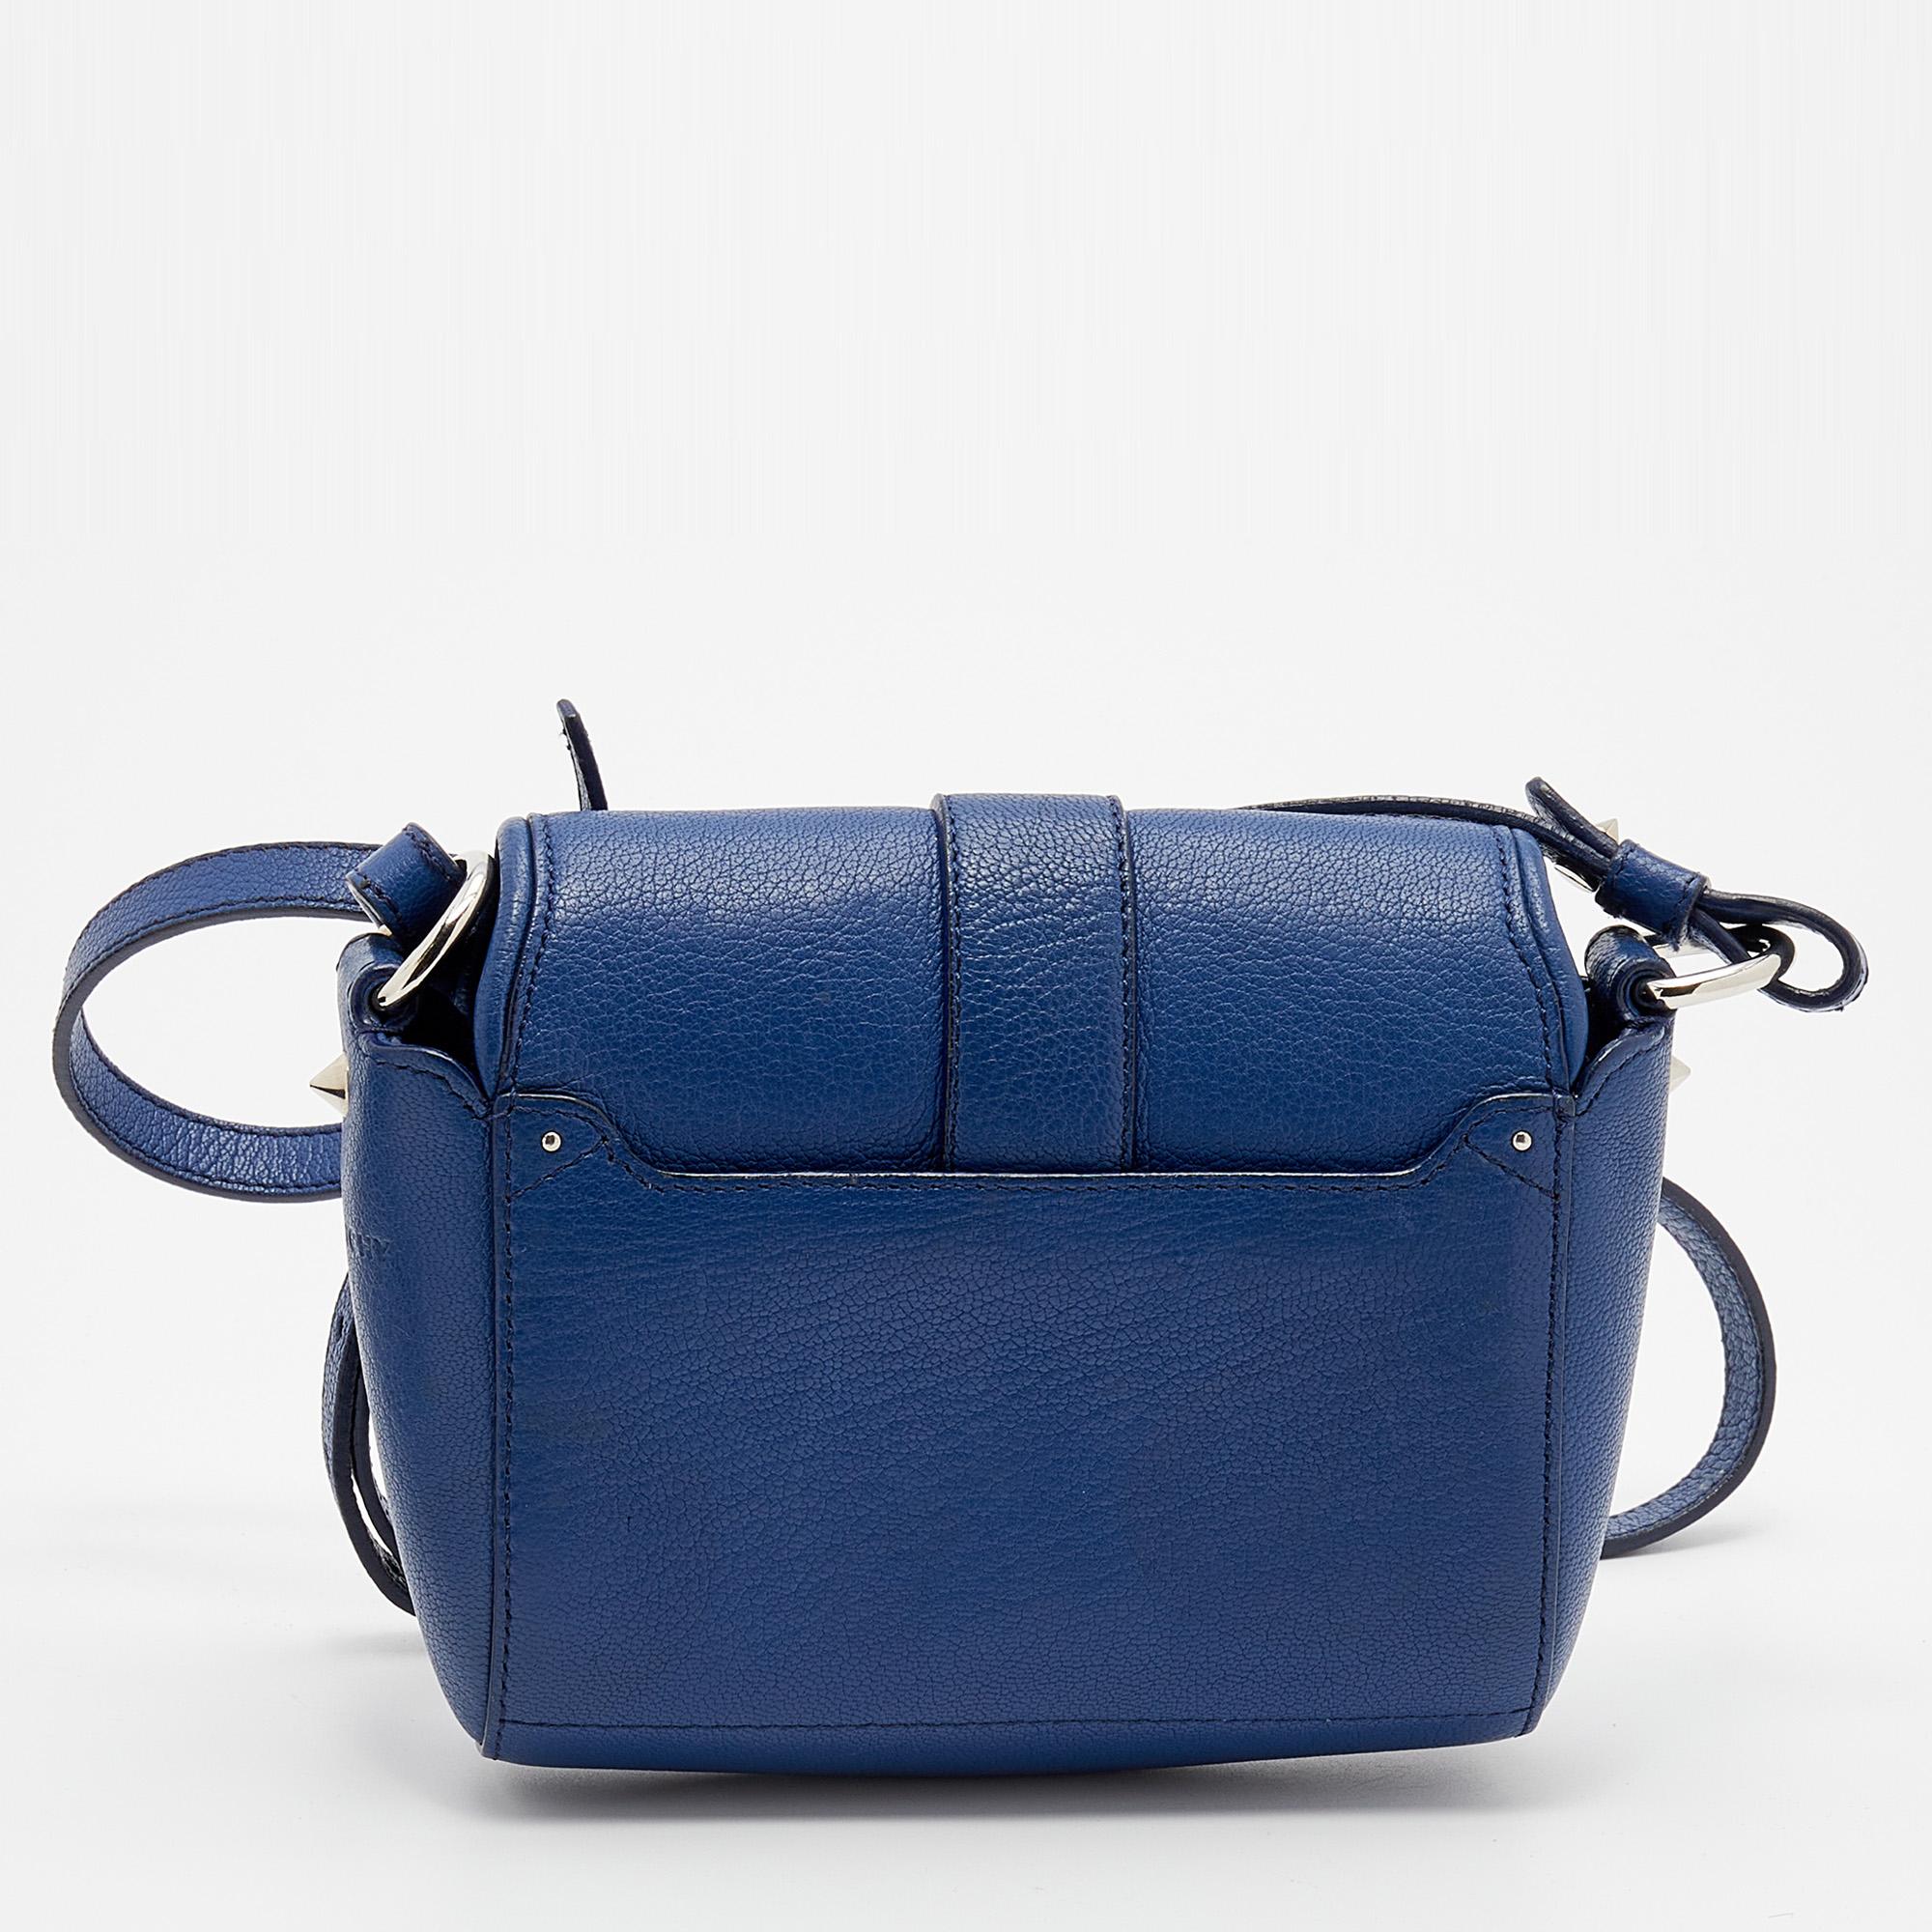 This gorgeous shoulder bag comes from the House of Givenchy. It is crafted from navy-blue leather on the exterior. It features a shoulder strap, silver-toned hardware, and a fabric-lined interior. This stunning creation is ideal for everyday use.

